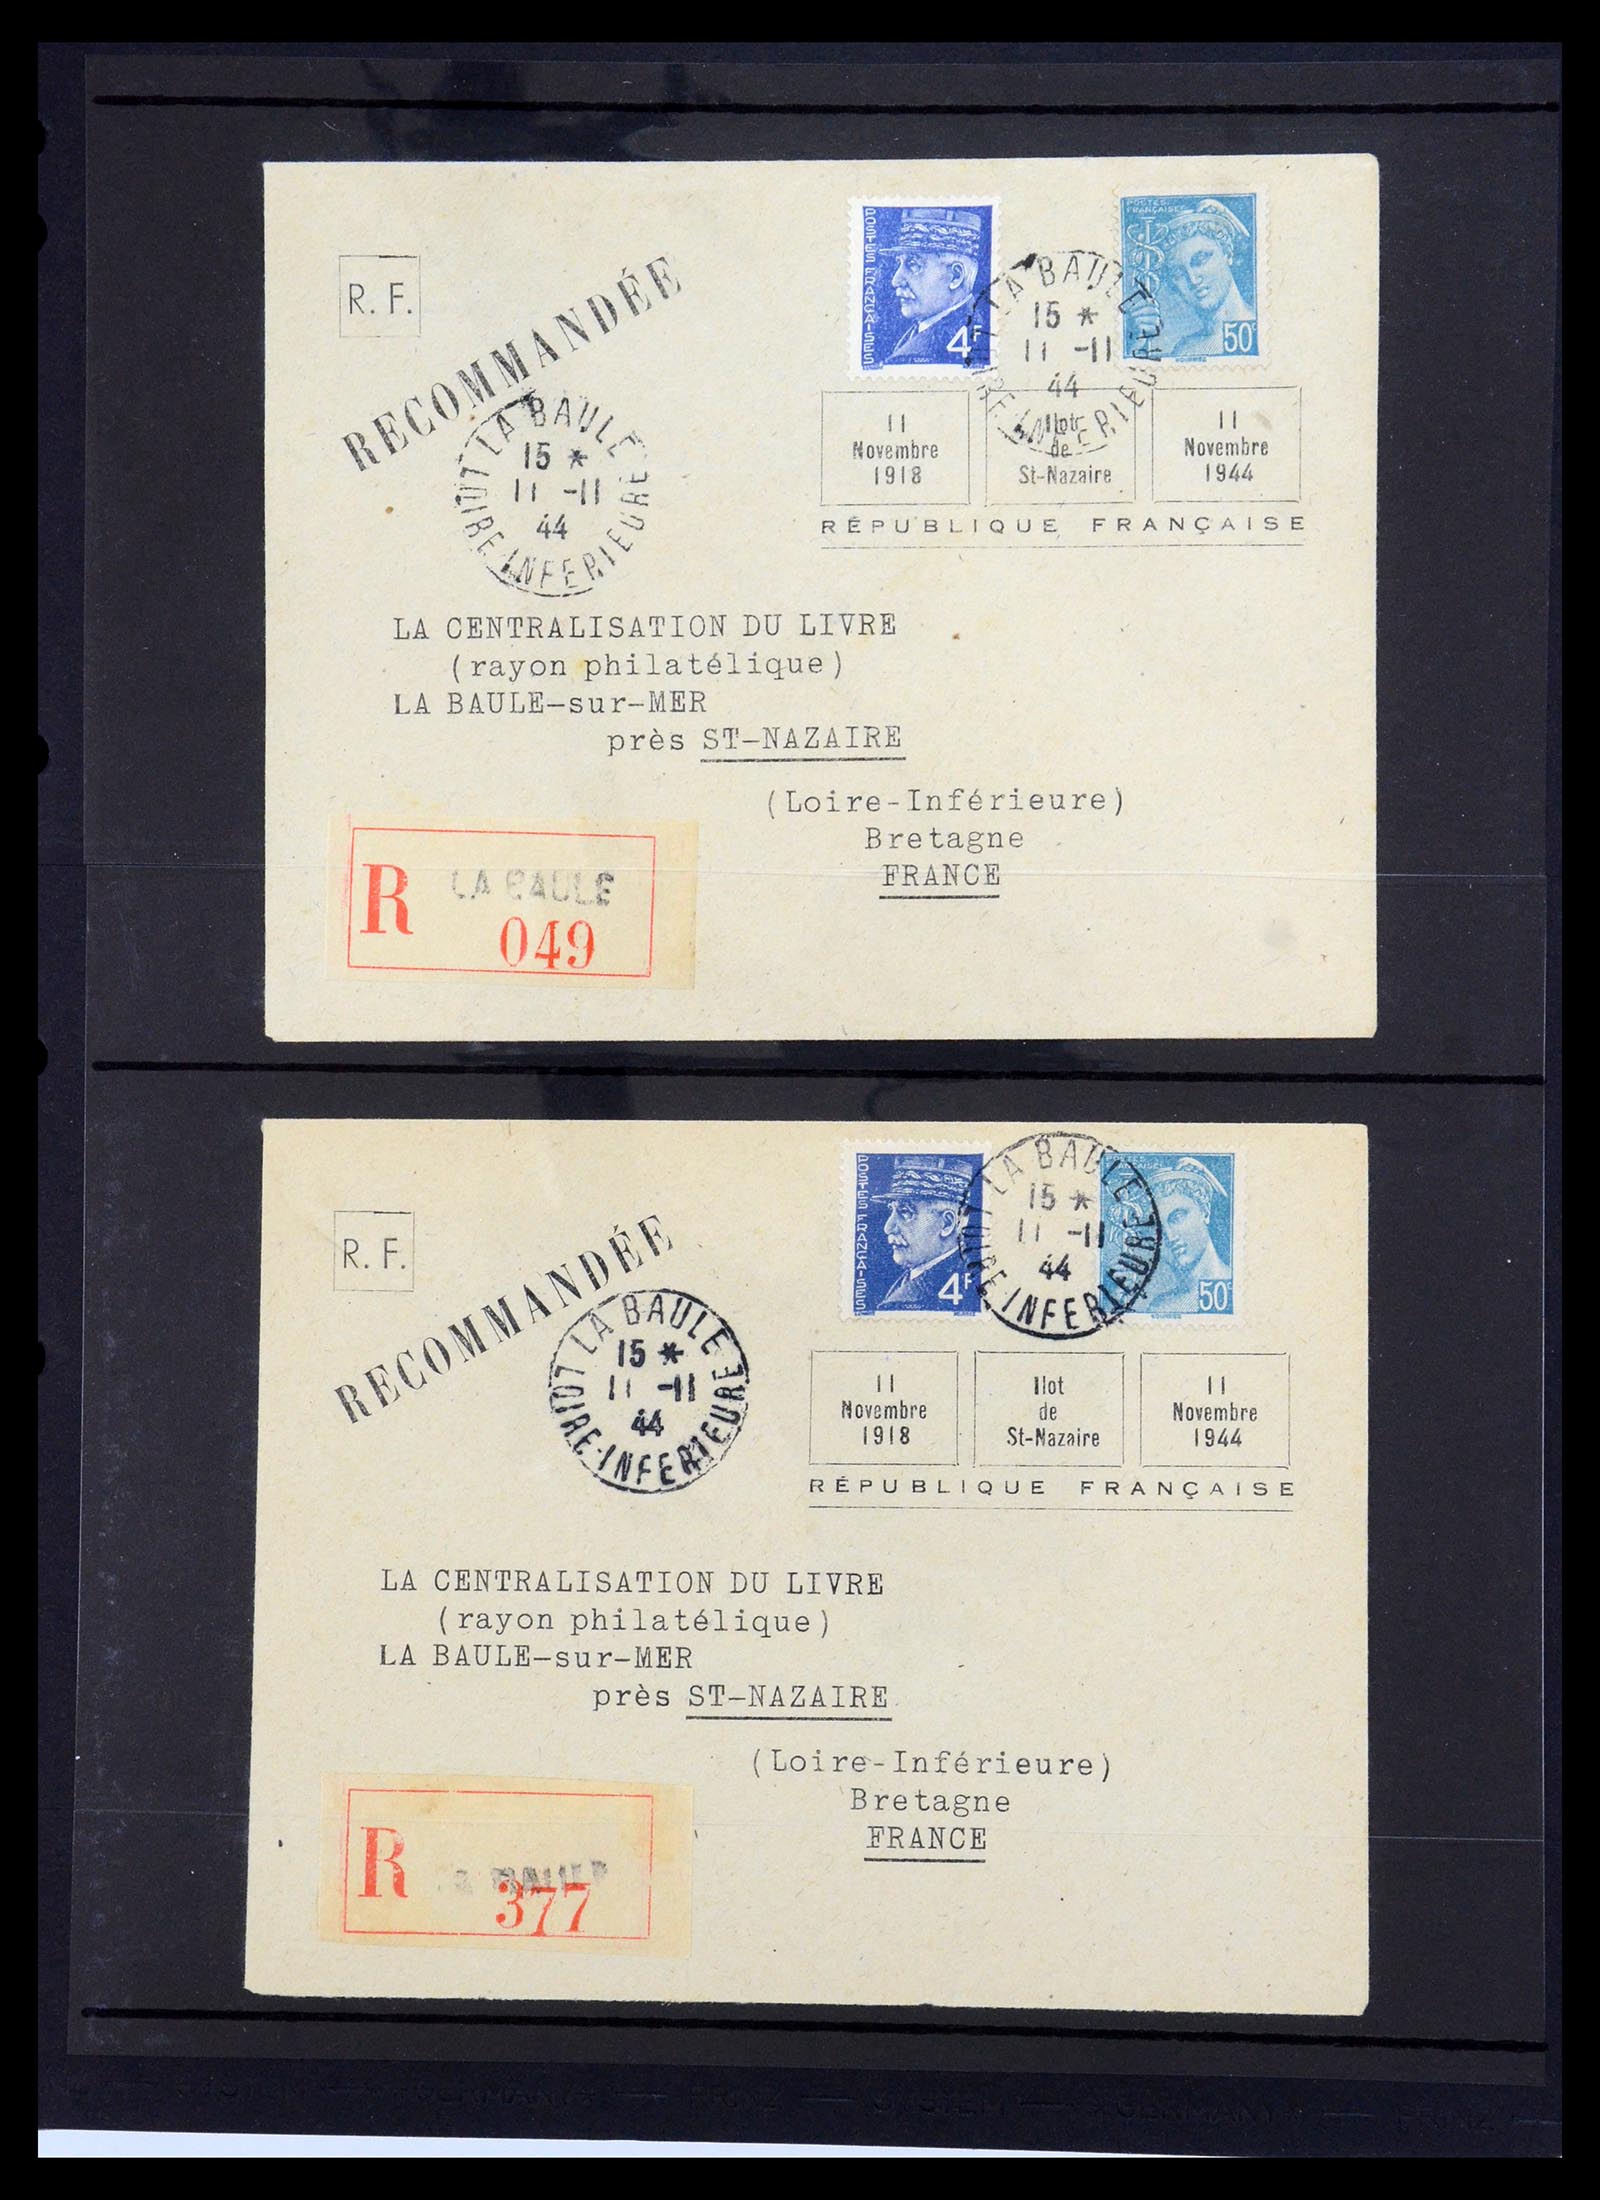 35440 001 - Stamp Collection 35440 German occupation WW II France 1944-1945.